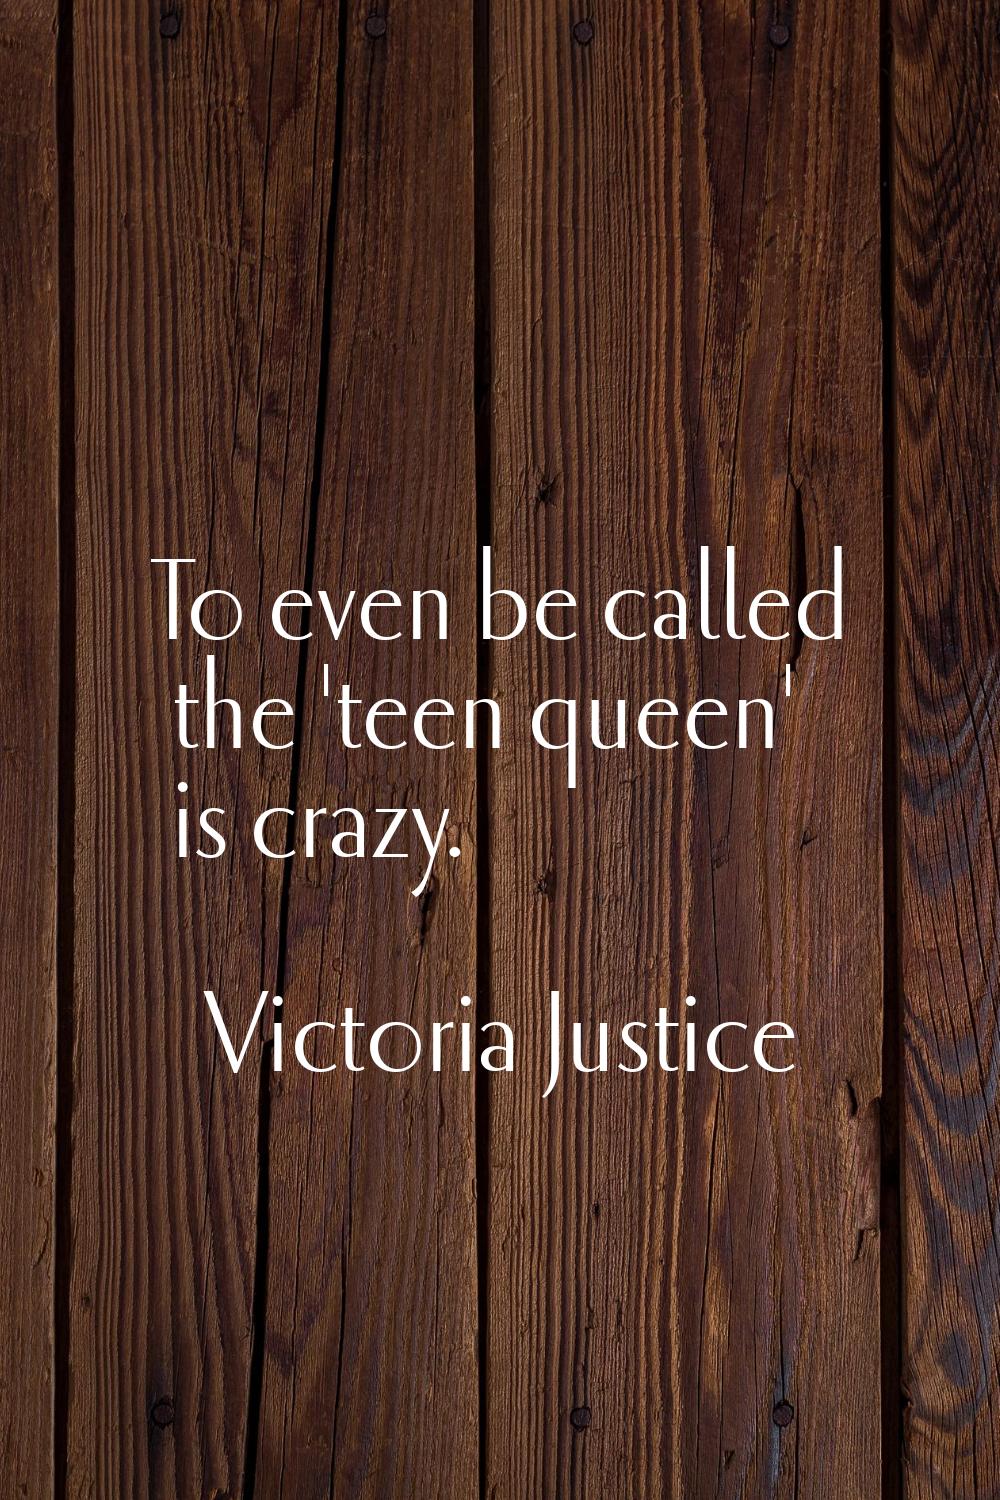 To even be called the 'teen queen' is crazy.